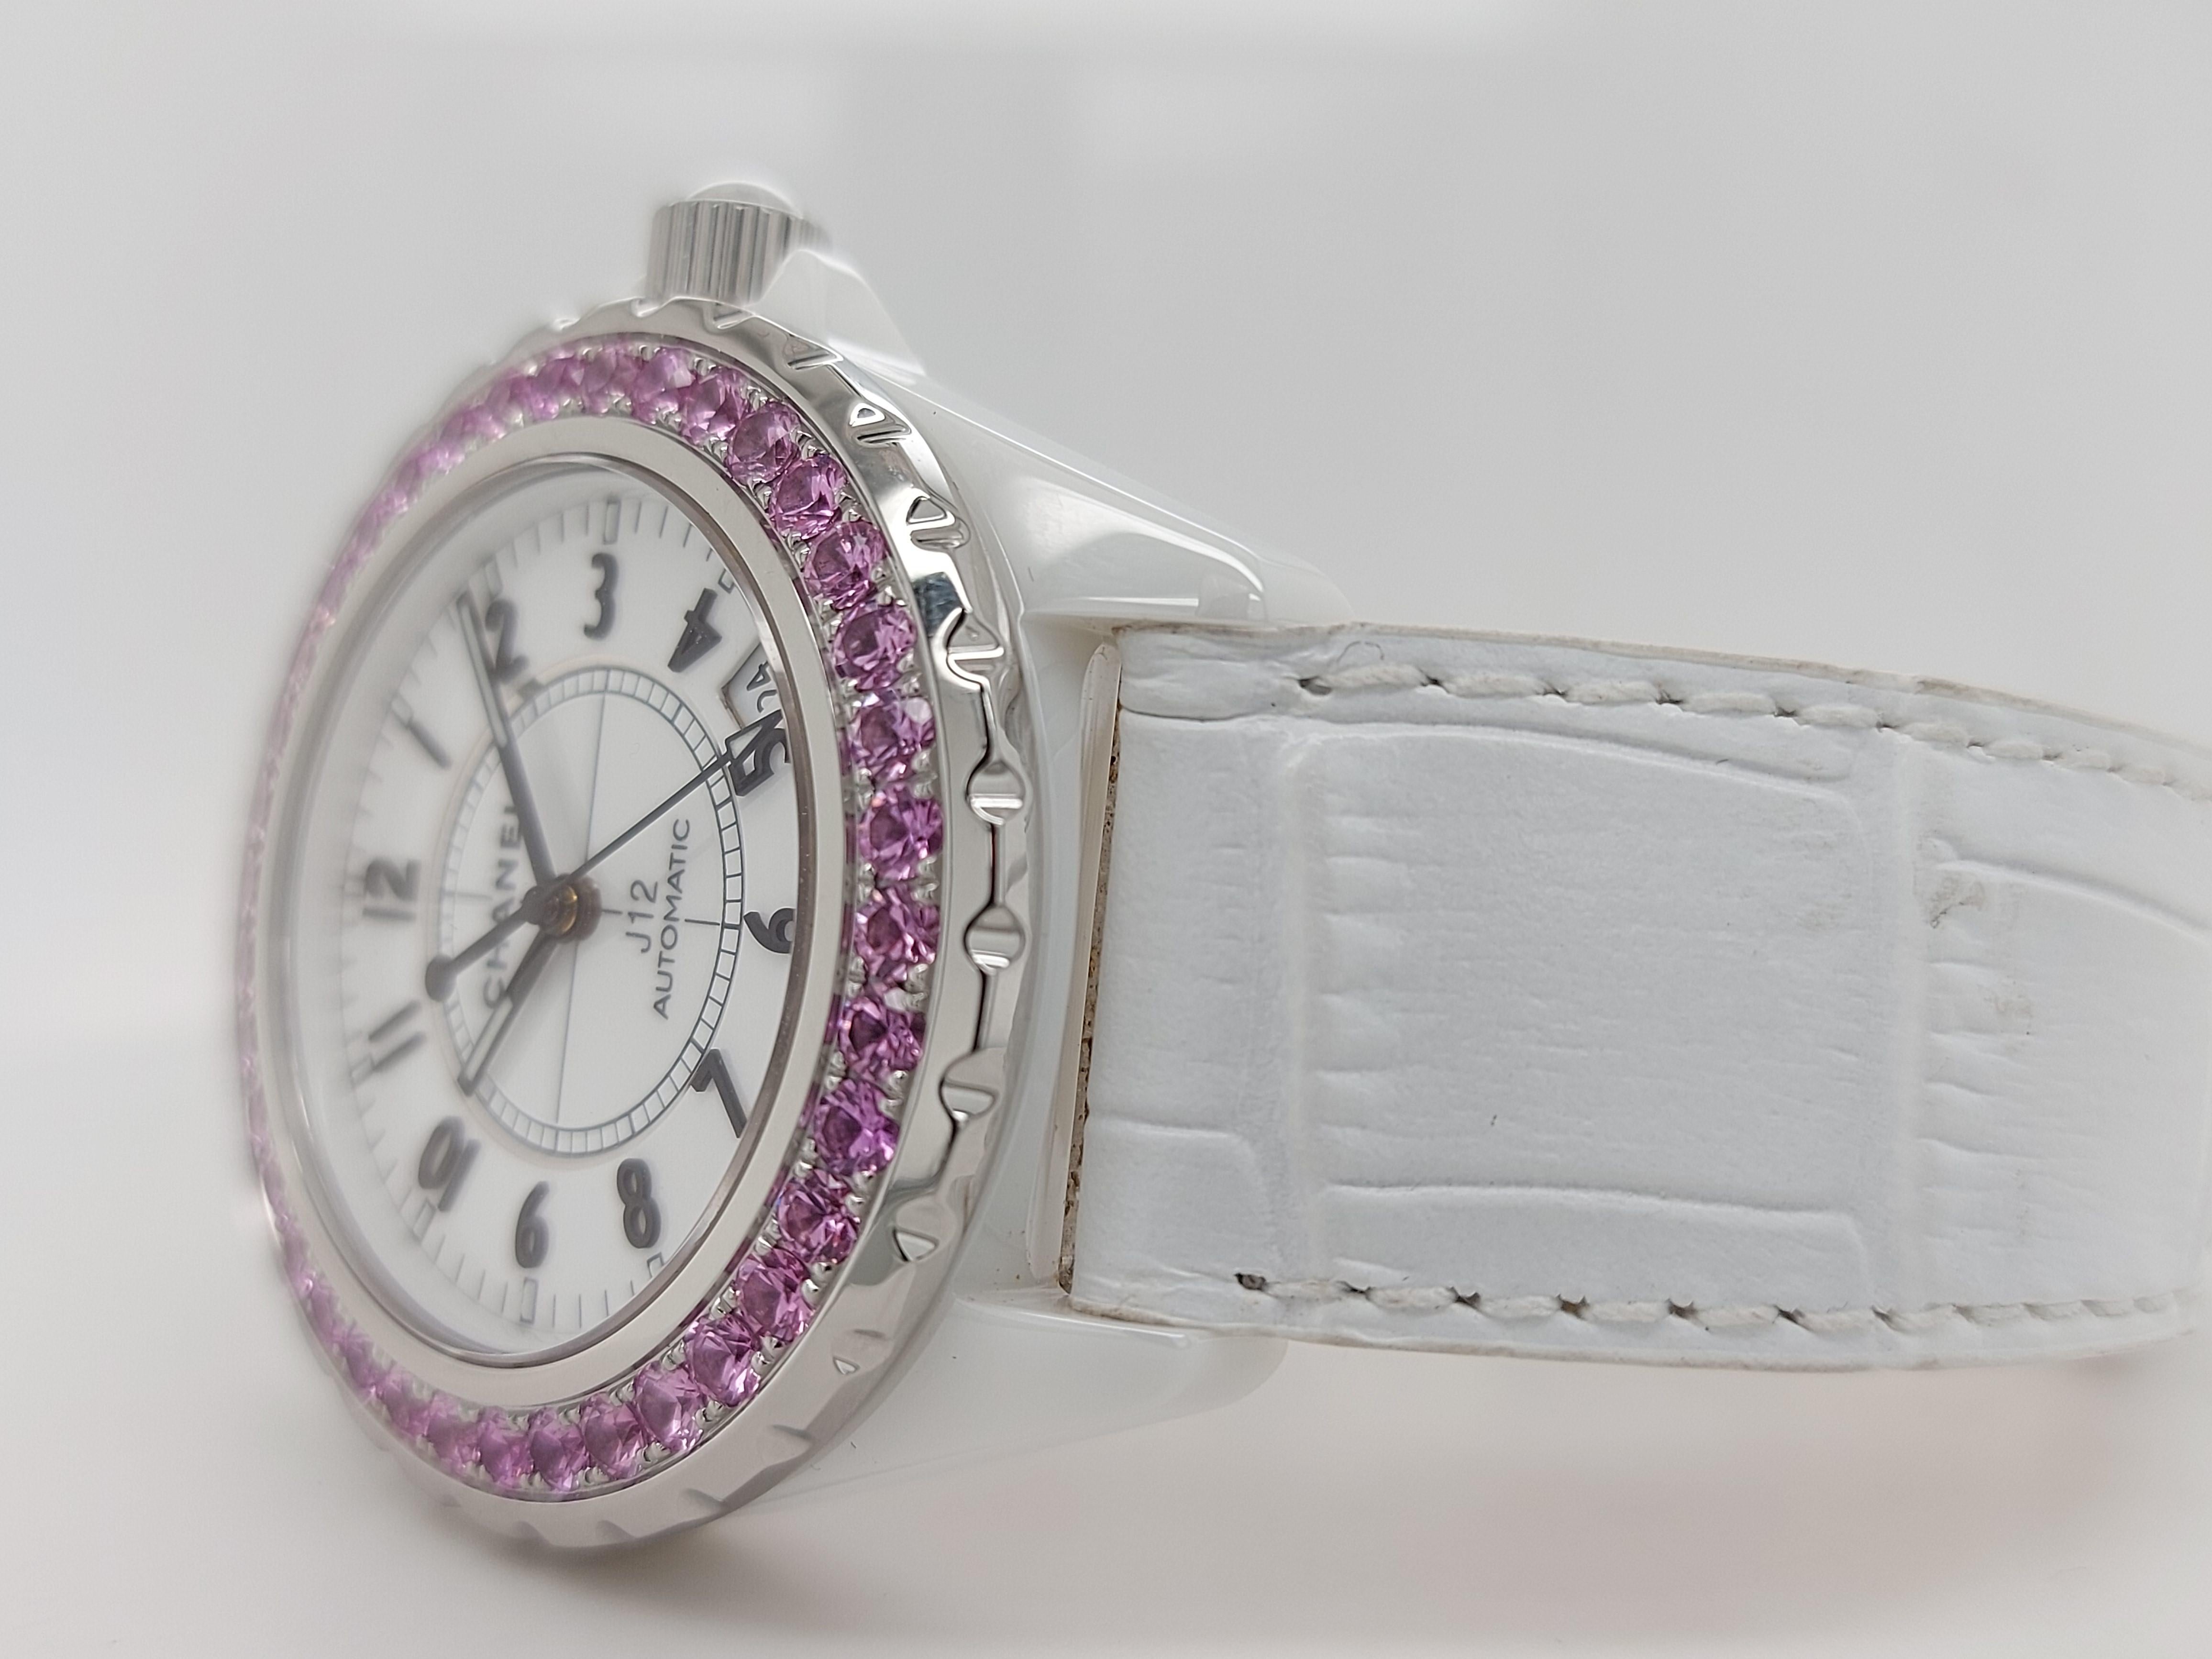 Chanel J12, Automatic, Ceramic Case, with Pink Sapphires 6